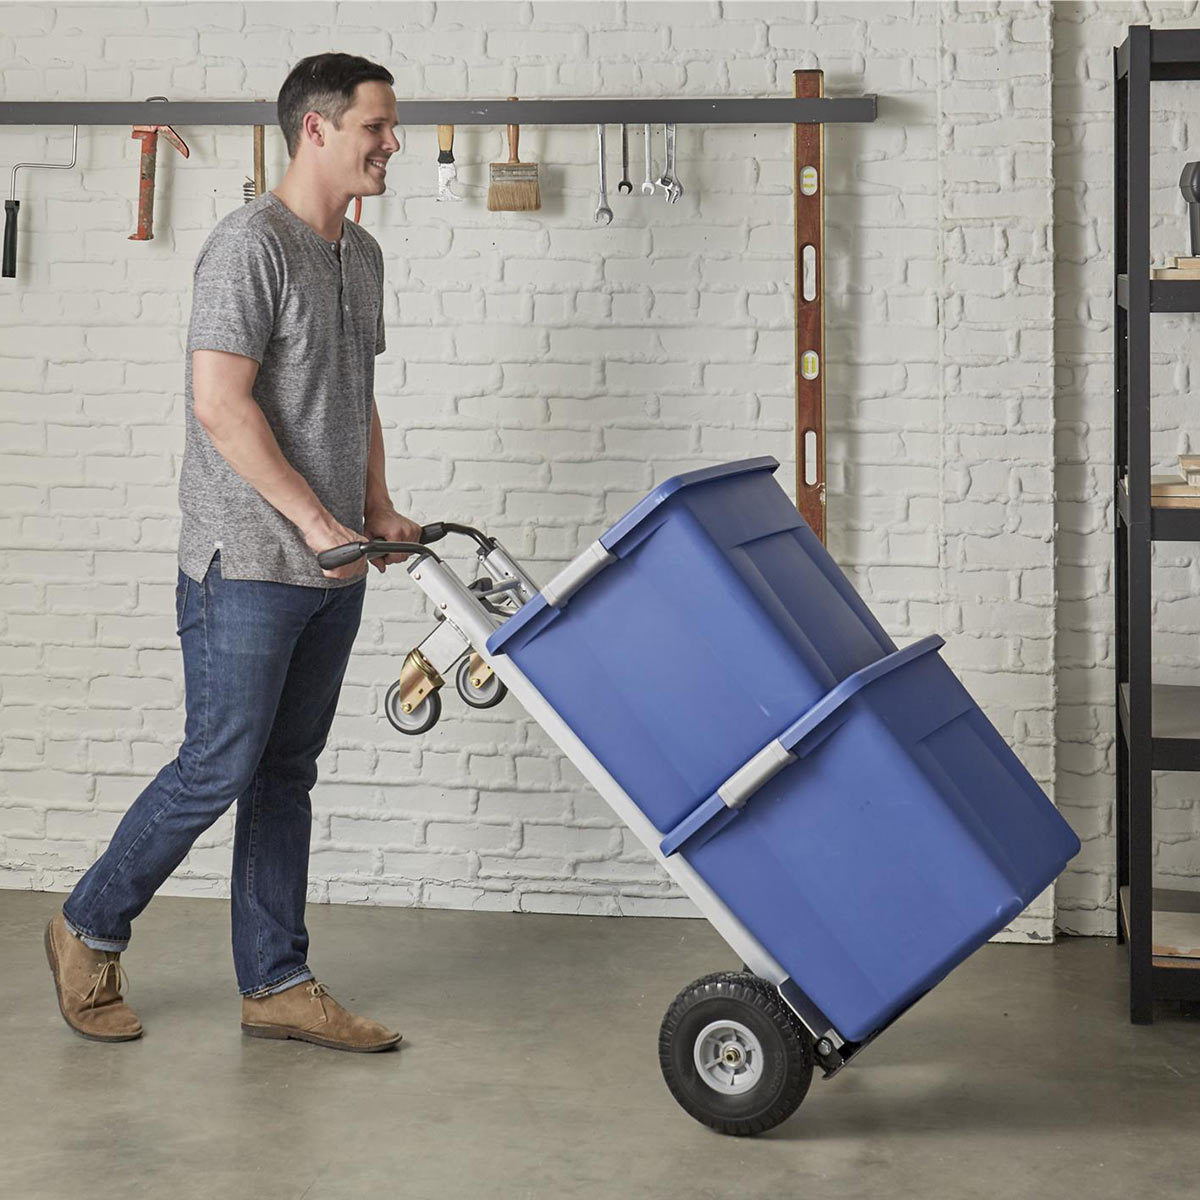 Man pushing hand truck upright loaded with boxes